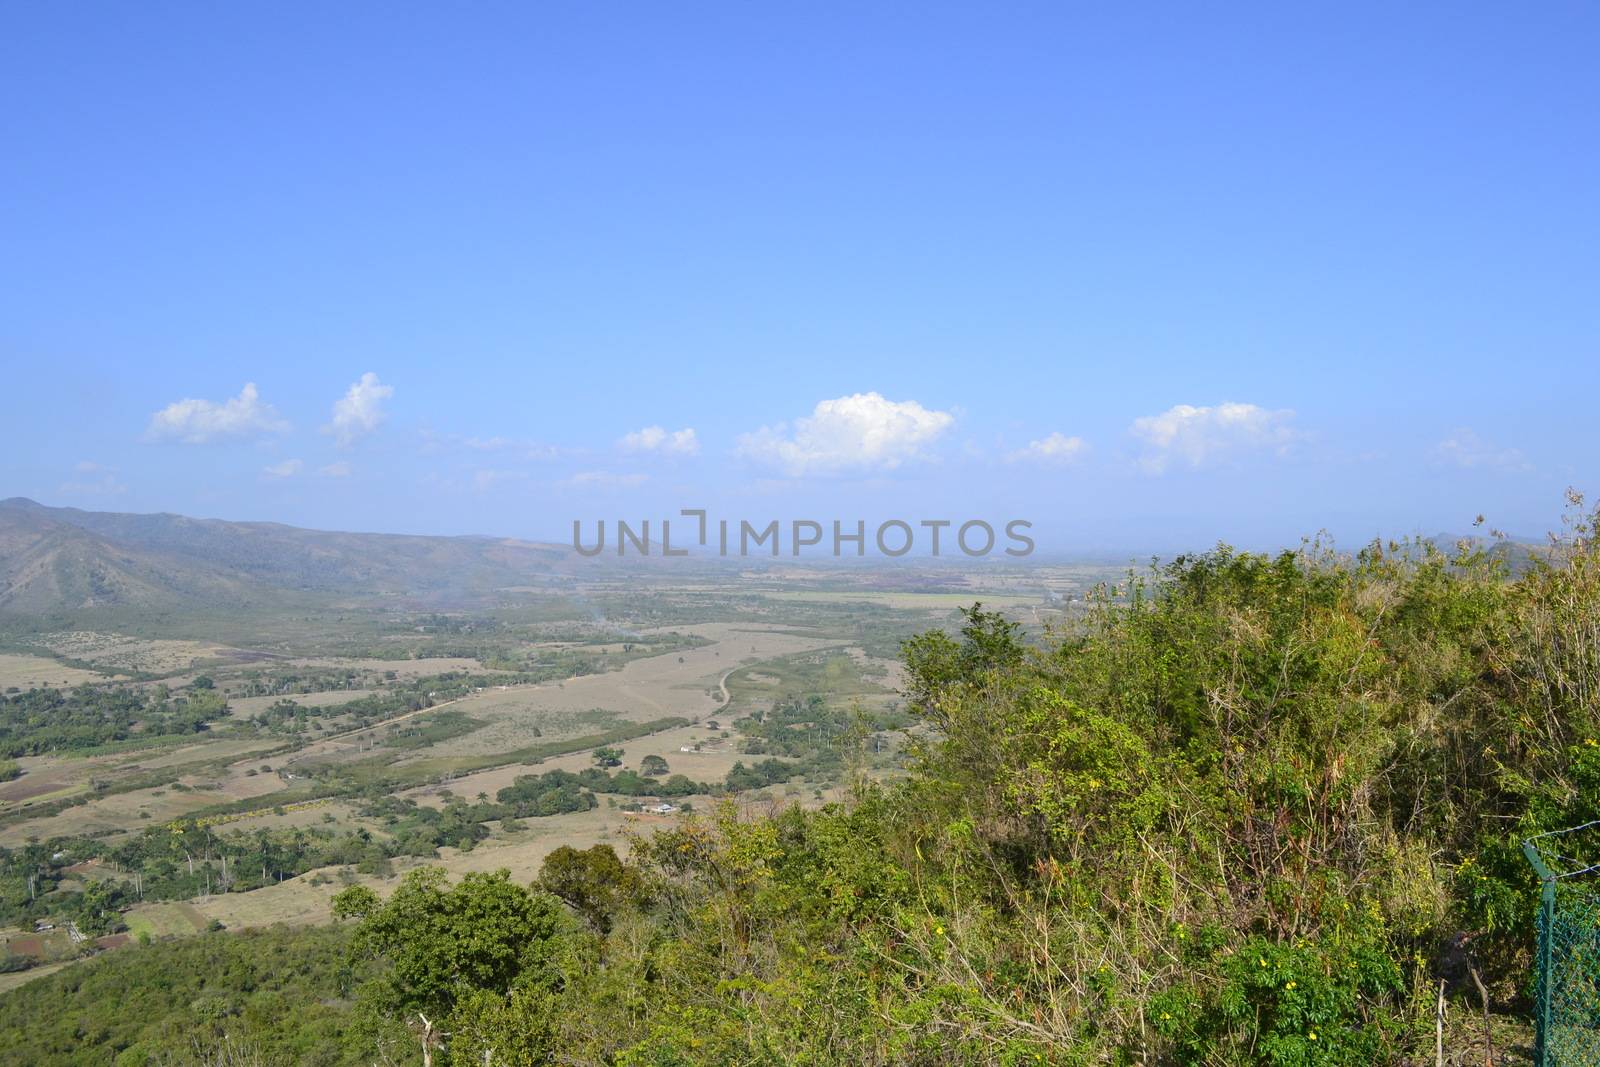 Landscape and scenery of the surroundings of Trinidad, Cuba, as seen from viewpoint Cerro de la Vigia. Travel and Tourism.